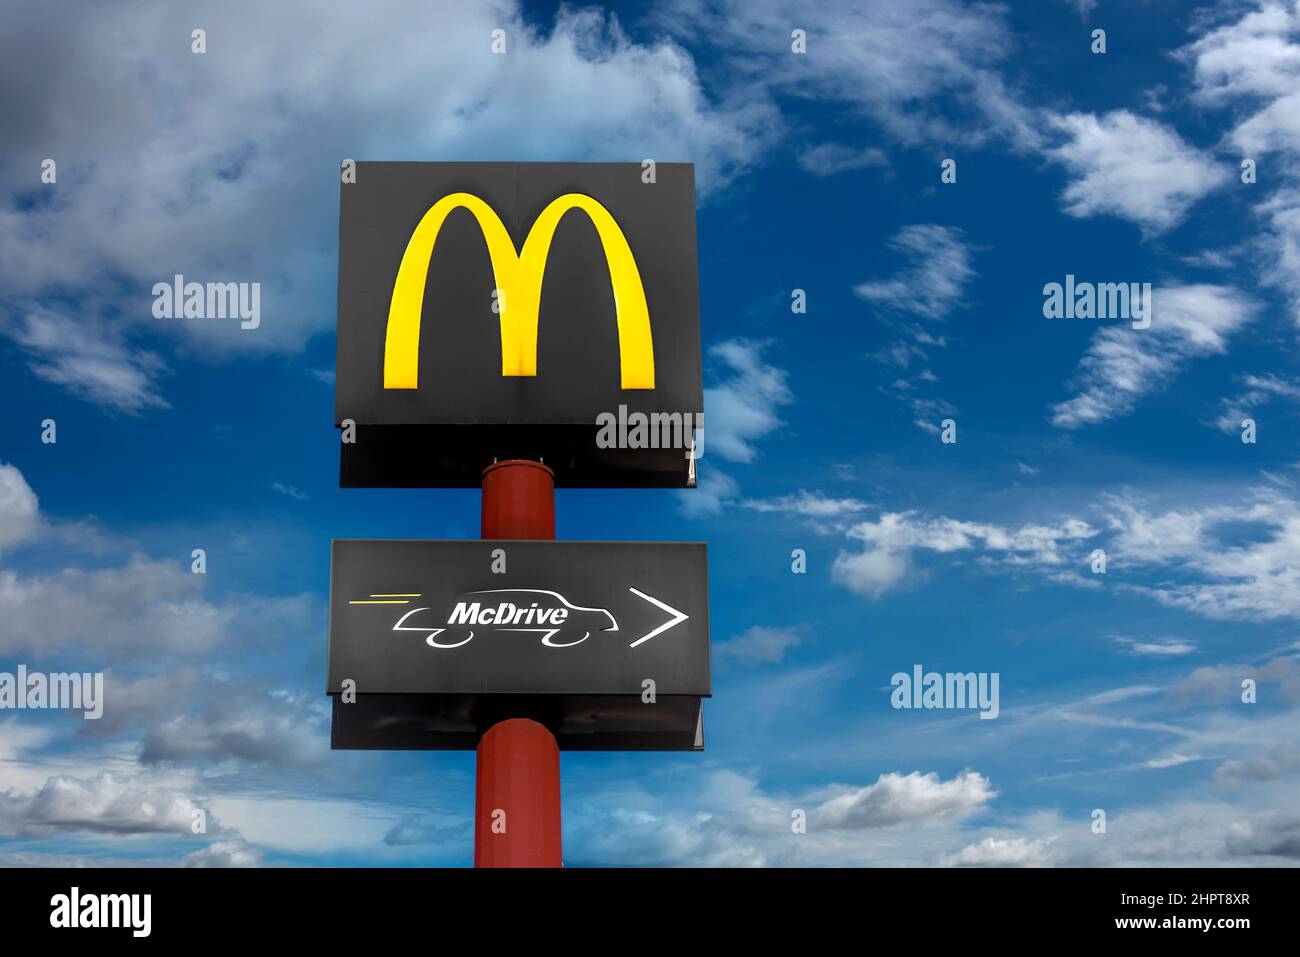 Fossano, Italy - February 22, 2022: McDonald's Restaurant logo sign and McDrive logo sign on red pole over blue sky with clouds. It is the world's lar Stock Photo